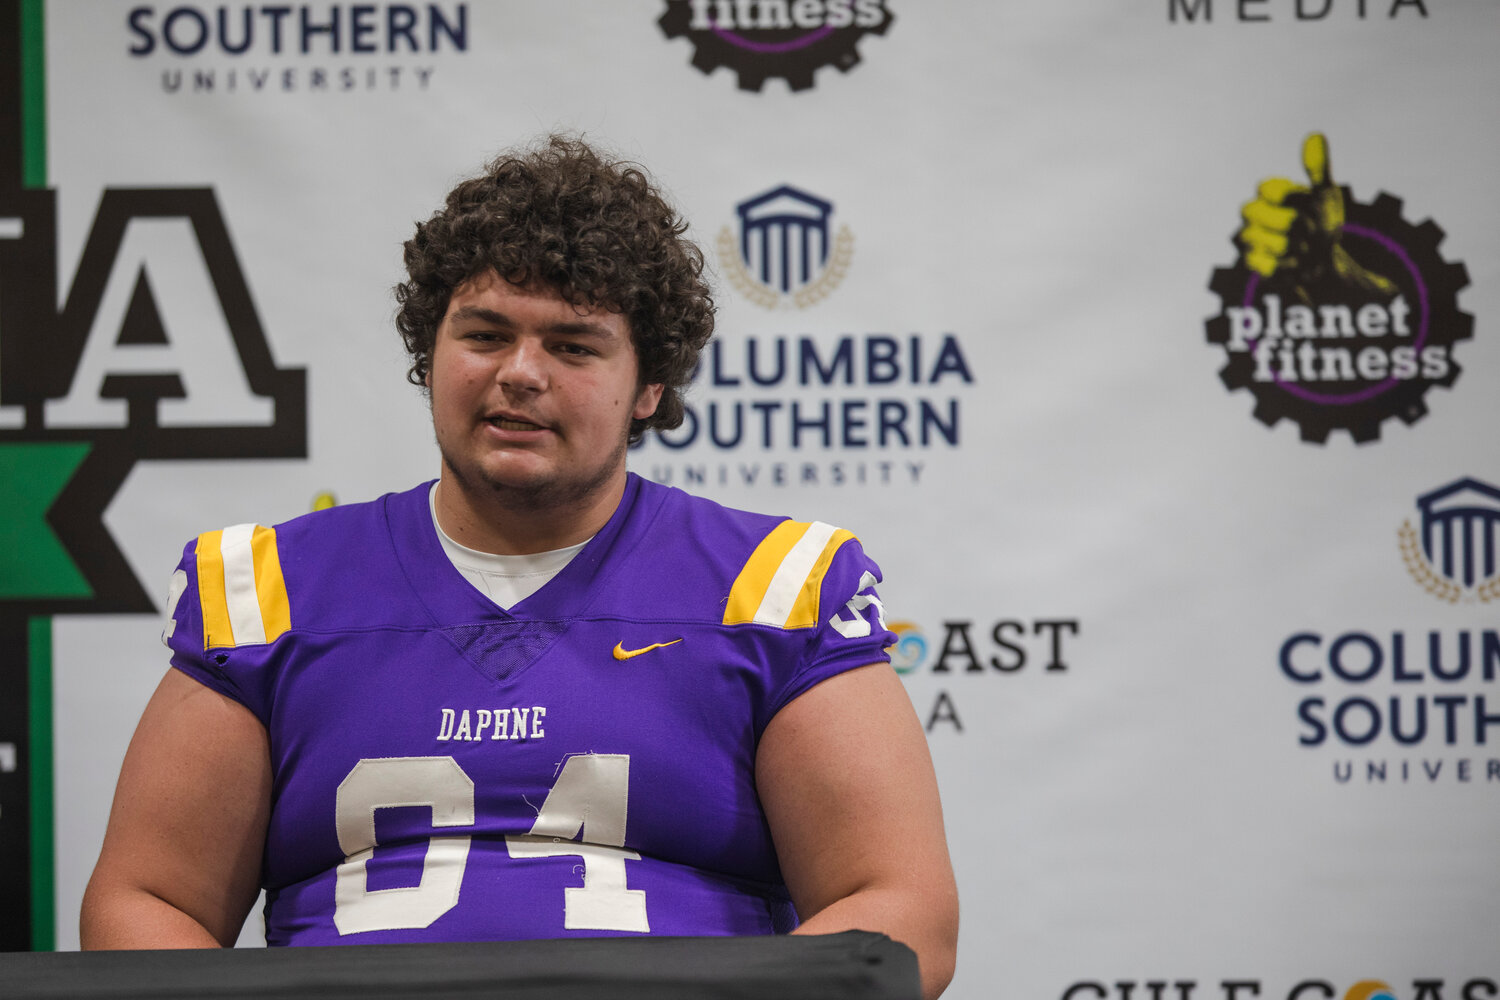 Daphne senior Cooper Donoghue will look to lead from the offensive line for the Trojans who start their season on Friday, Aug. 25, on the road against Murphy. Donoghue was one of Daphne’s media day representatives in Orange Beach on July 27.